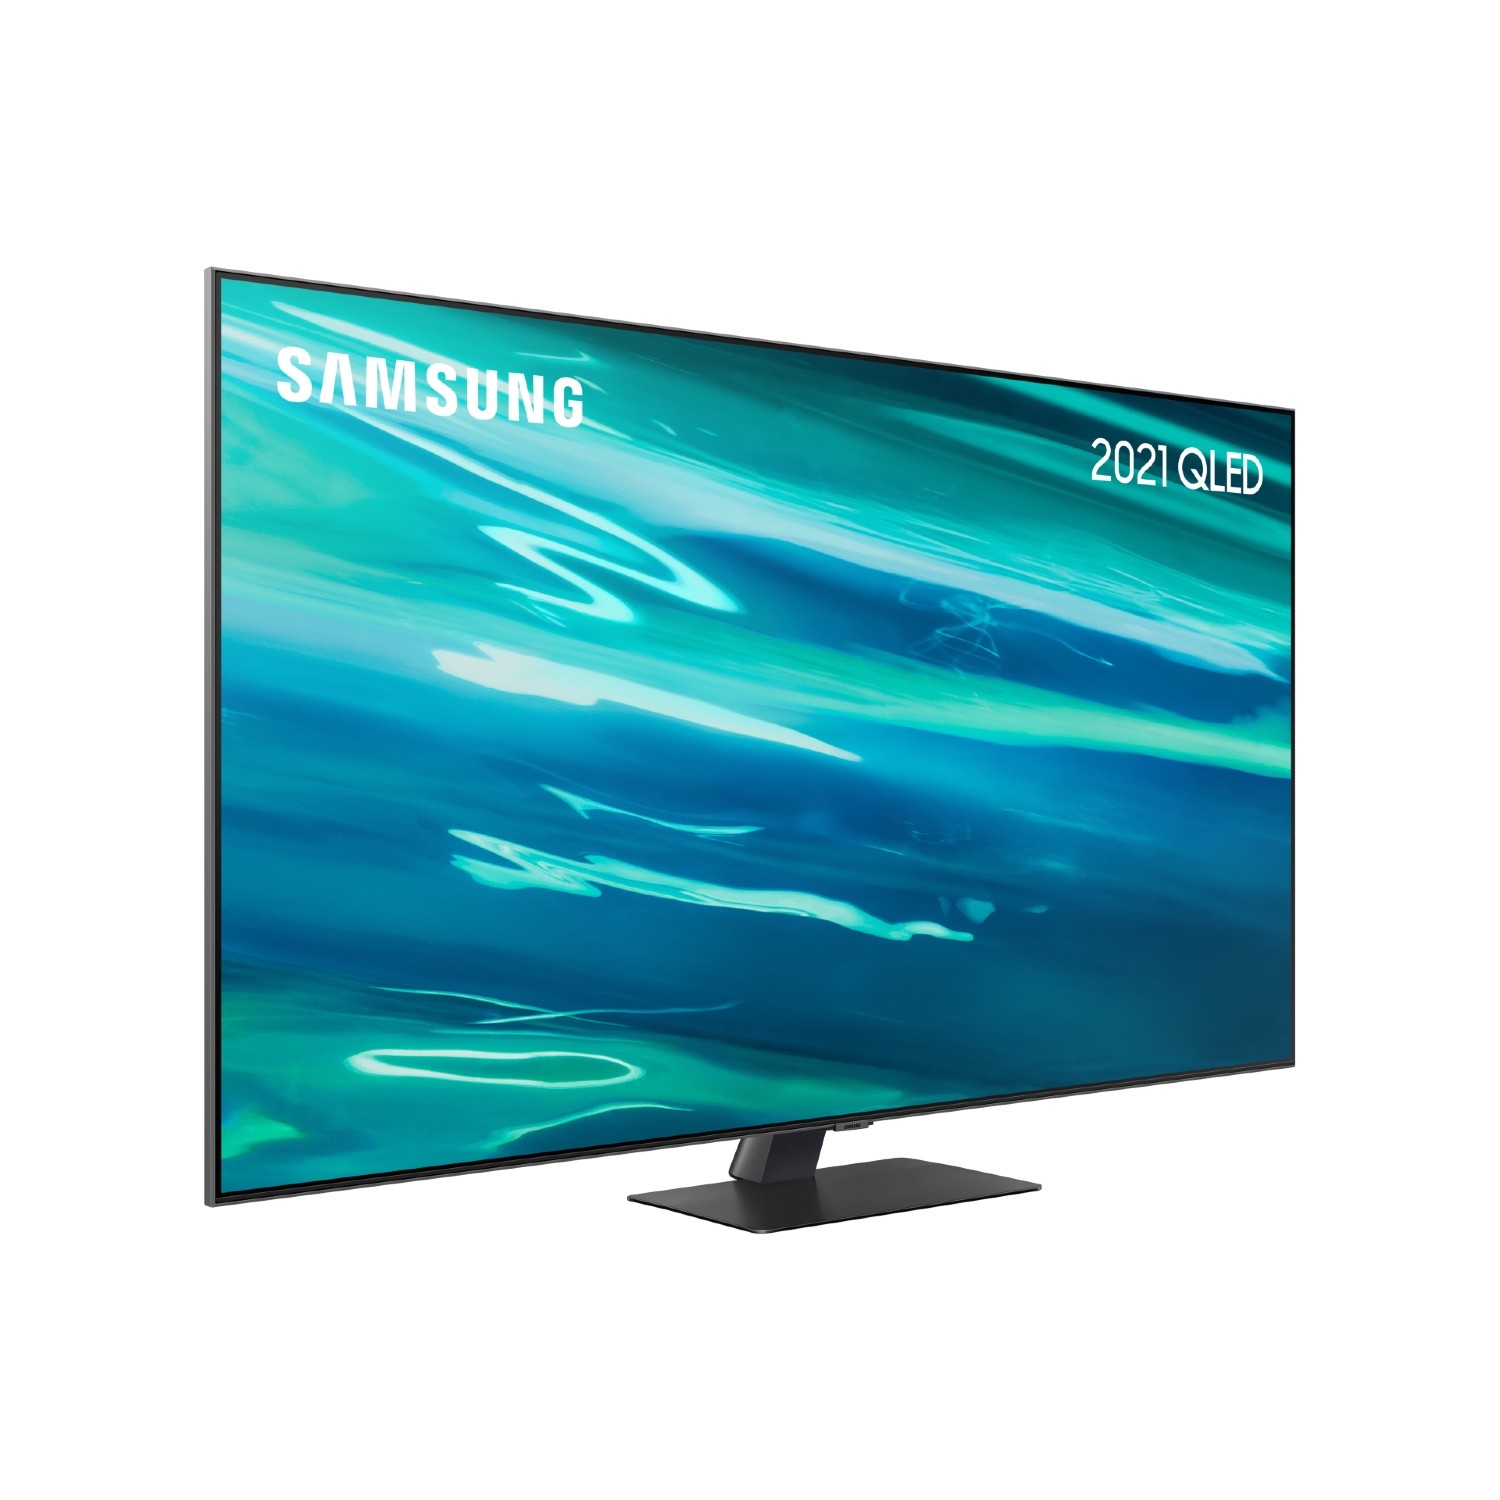 Samsung QE55Q80AATXXU 55" 4K QLED Smart TV Quantum HDR 1500 powered by HDR10+ with object tracking and AI sound - 2